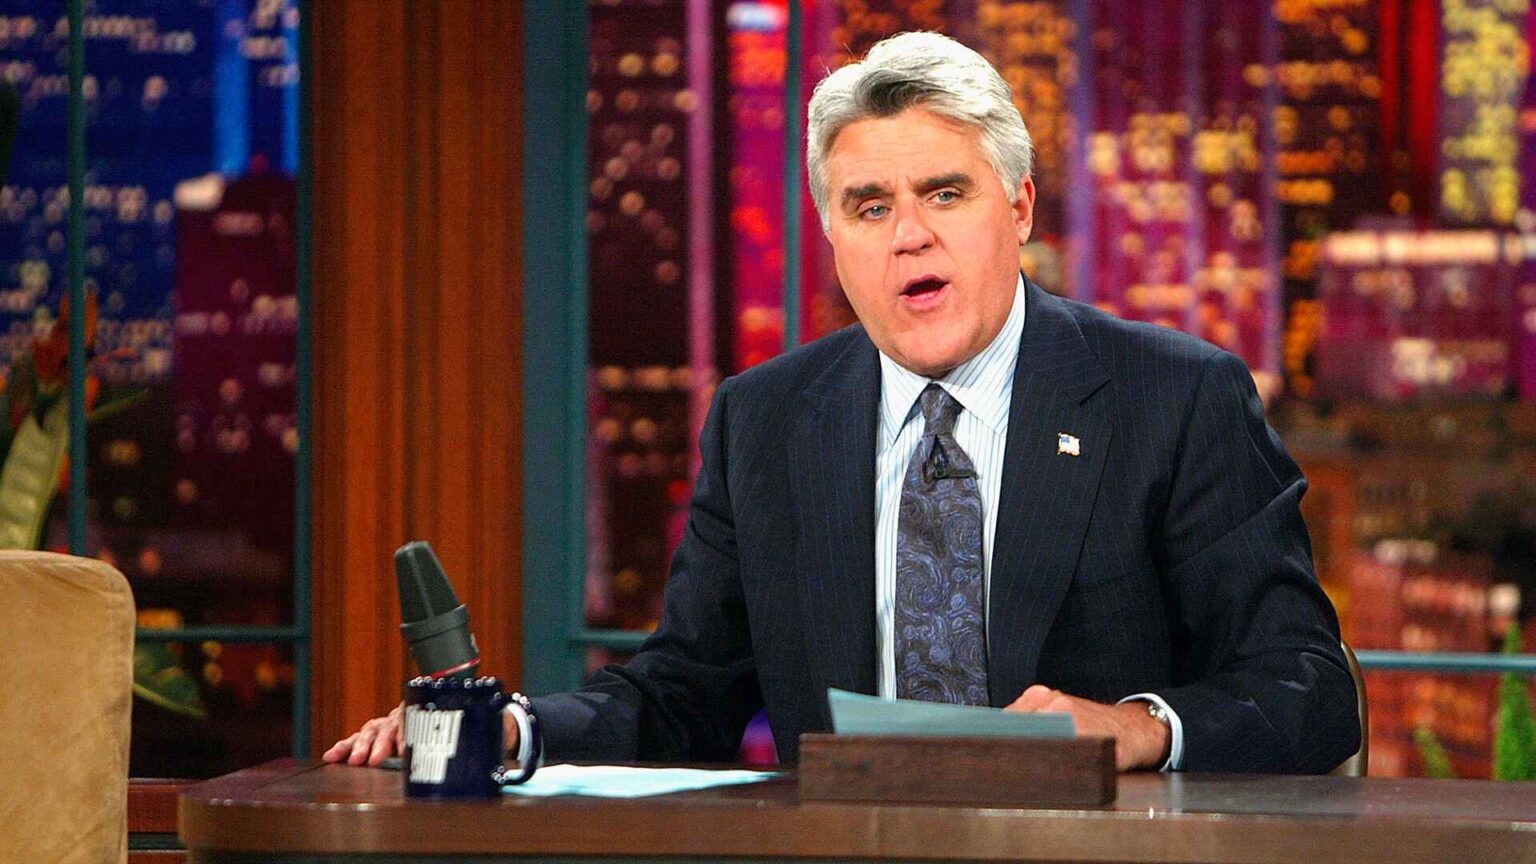 Jay Leno suffered from an accident last November 12th, but was his net worth affected? It looks like he didn't even care. Here's all you need to know.